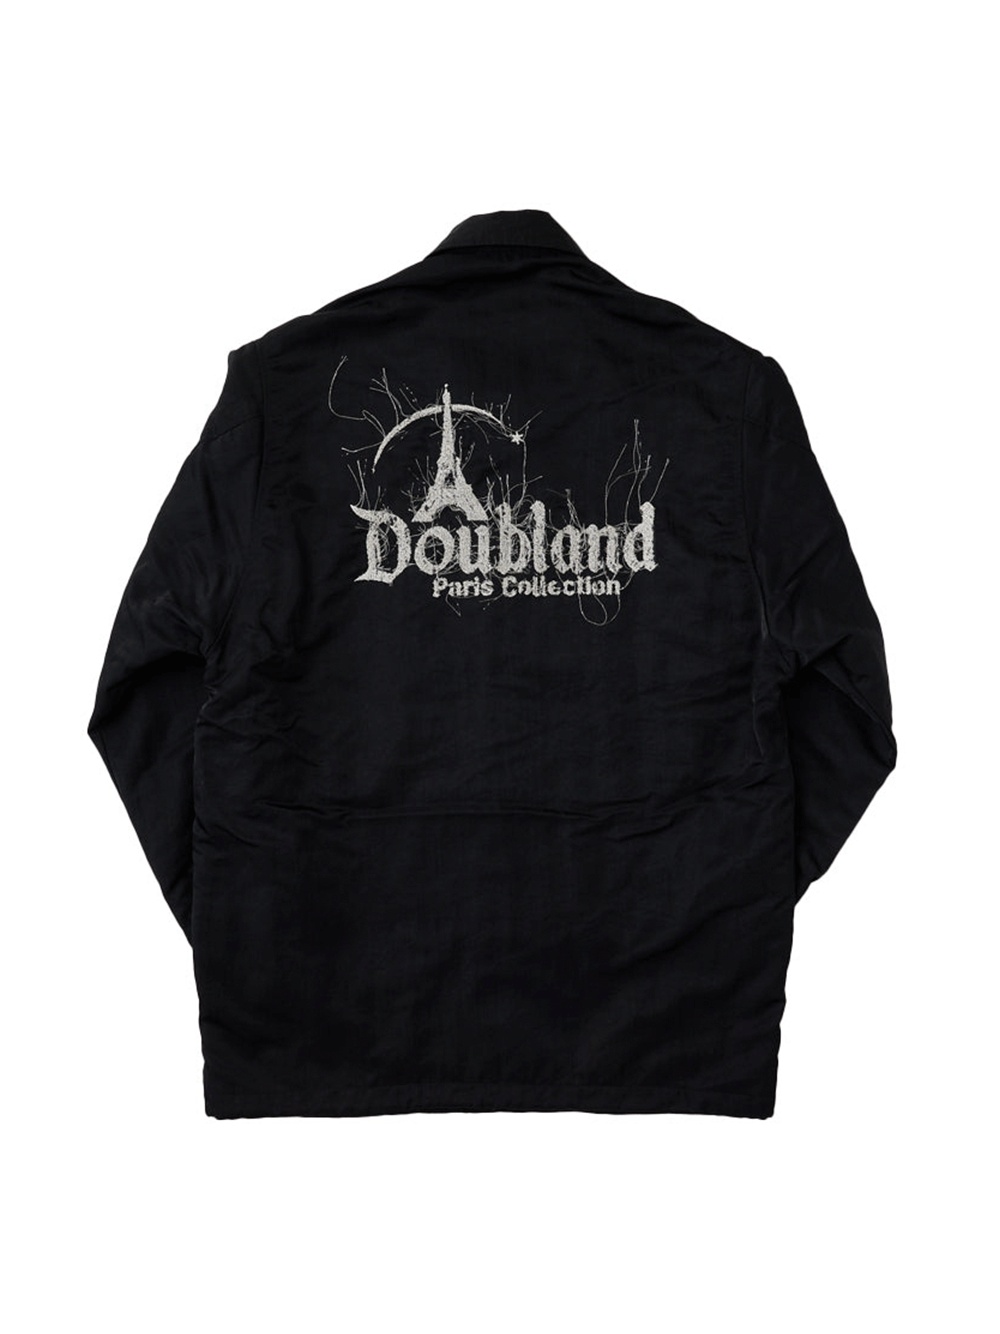 "DOUBLAND" Embroidery Coach Jacket - 2